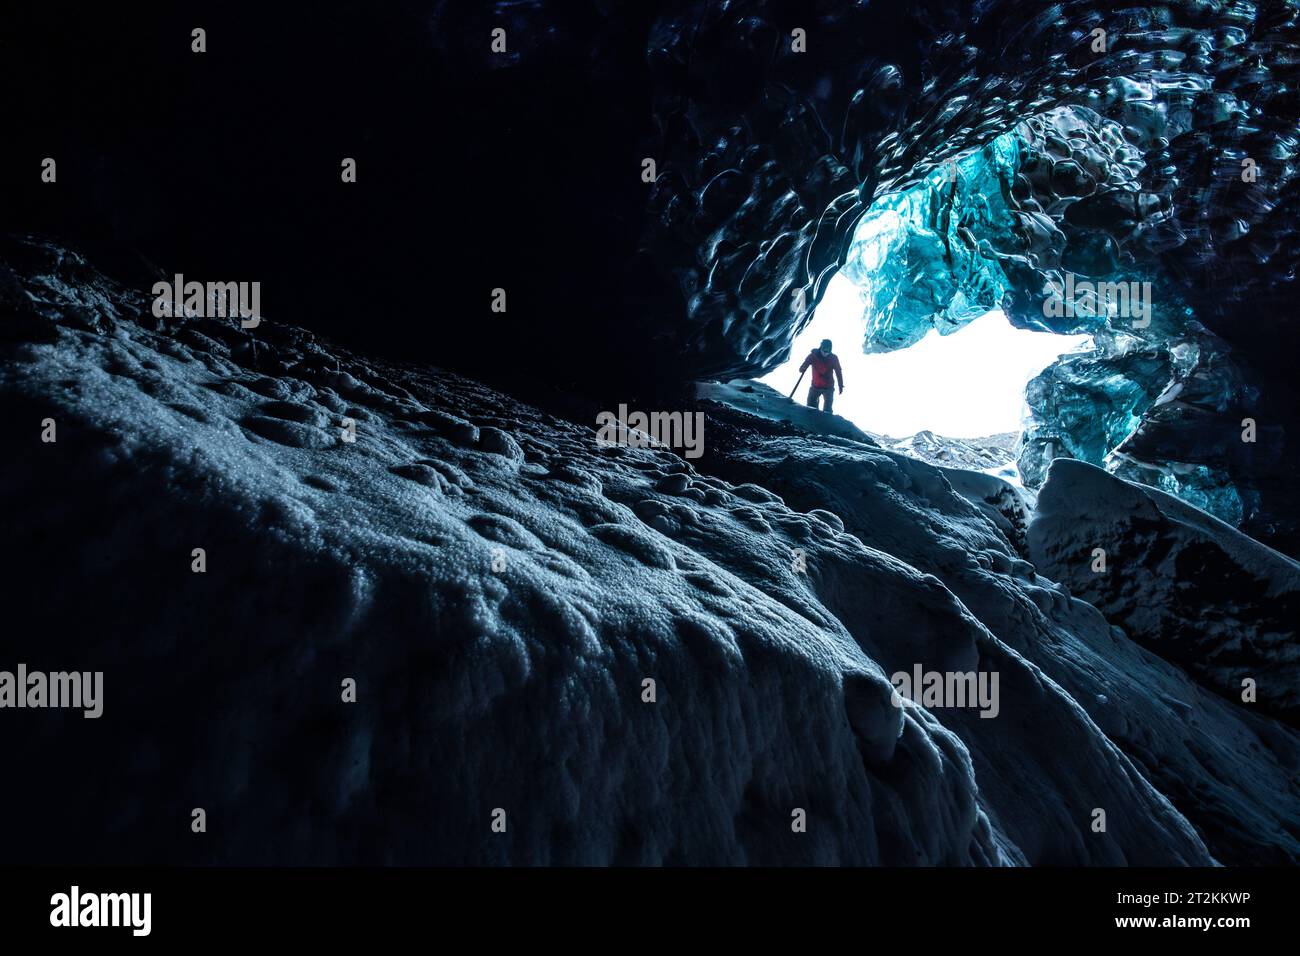 Adventurer discovering the inside of an ice cave in Iceland Stock Photo